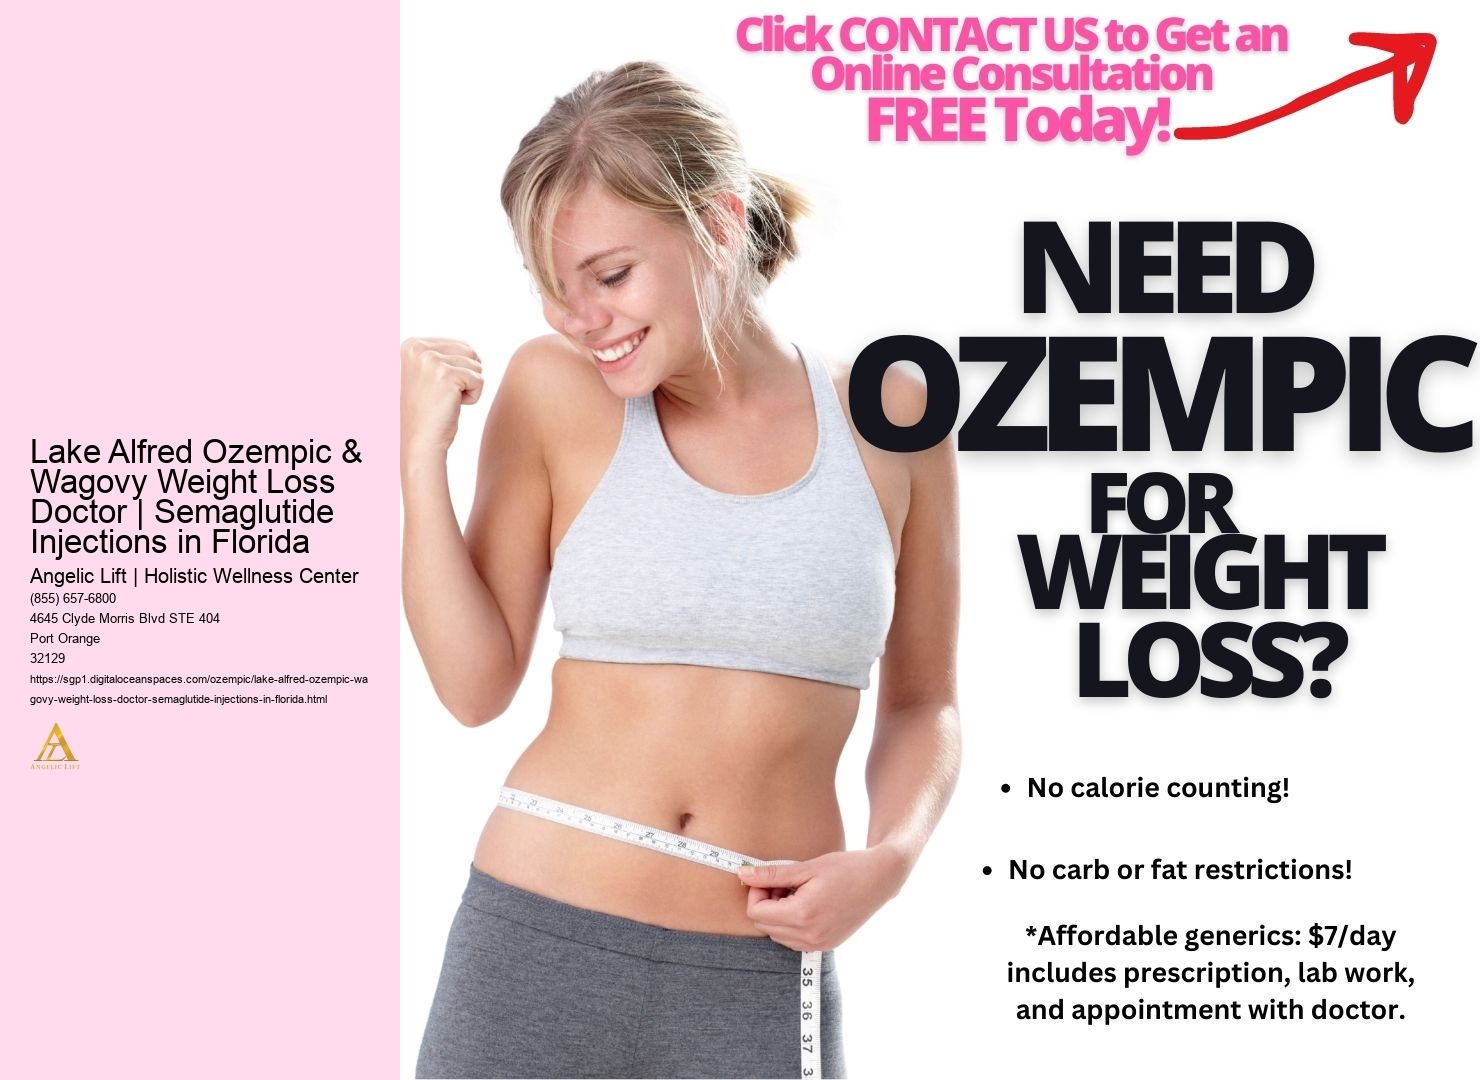 Lake Alfred Ozempic & Wagovy Weight Loss Doctor | Semaglutide Injections in Florida